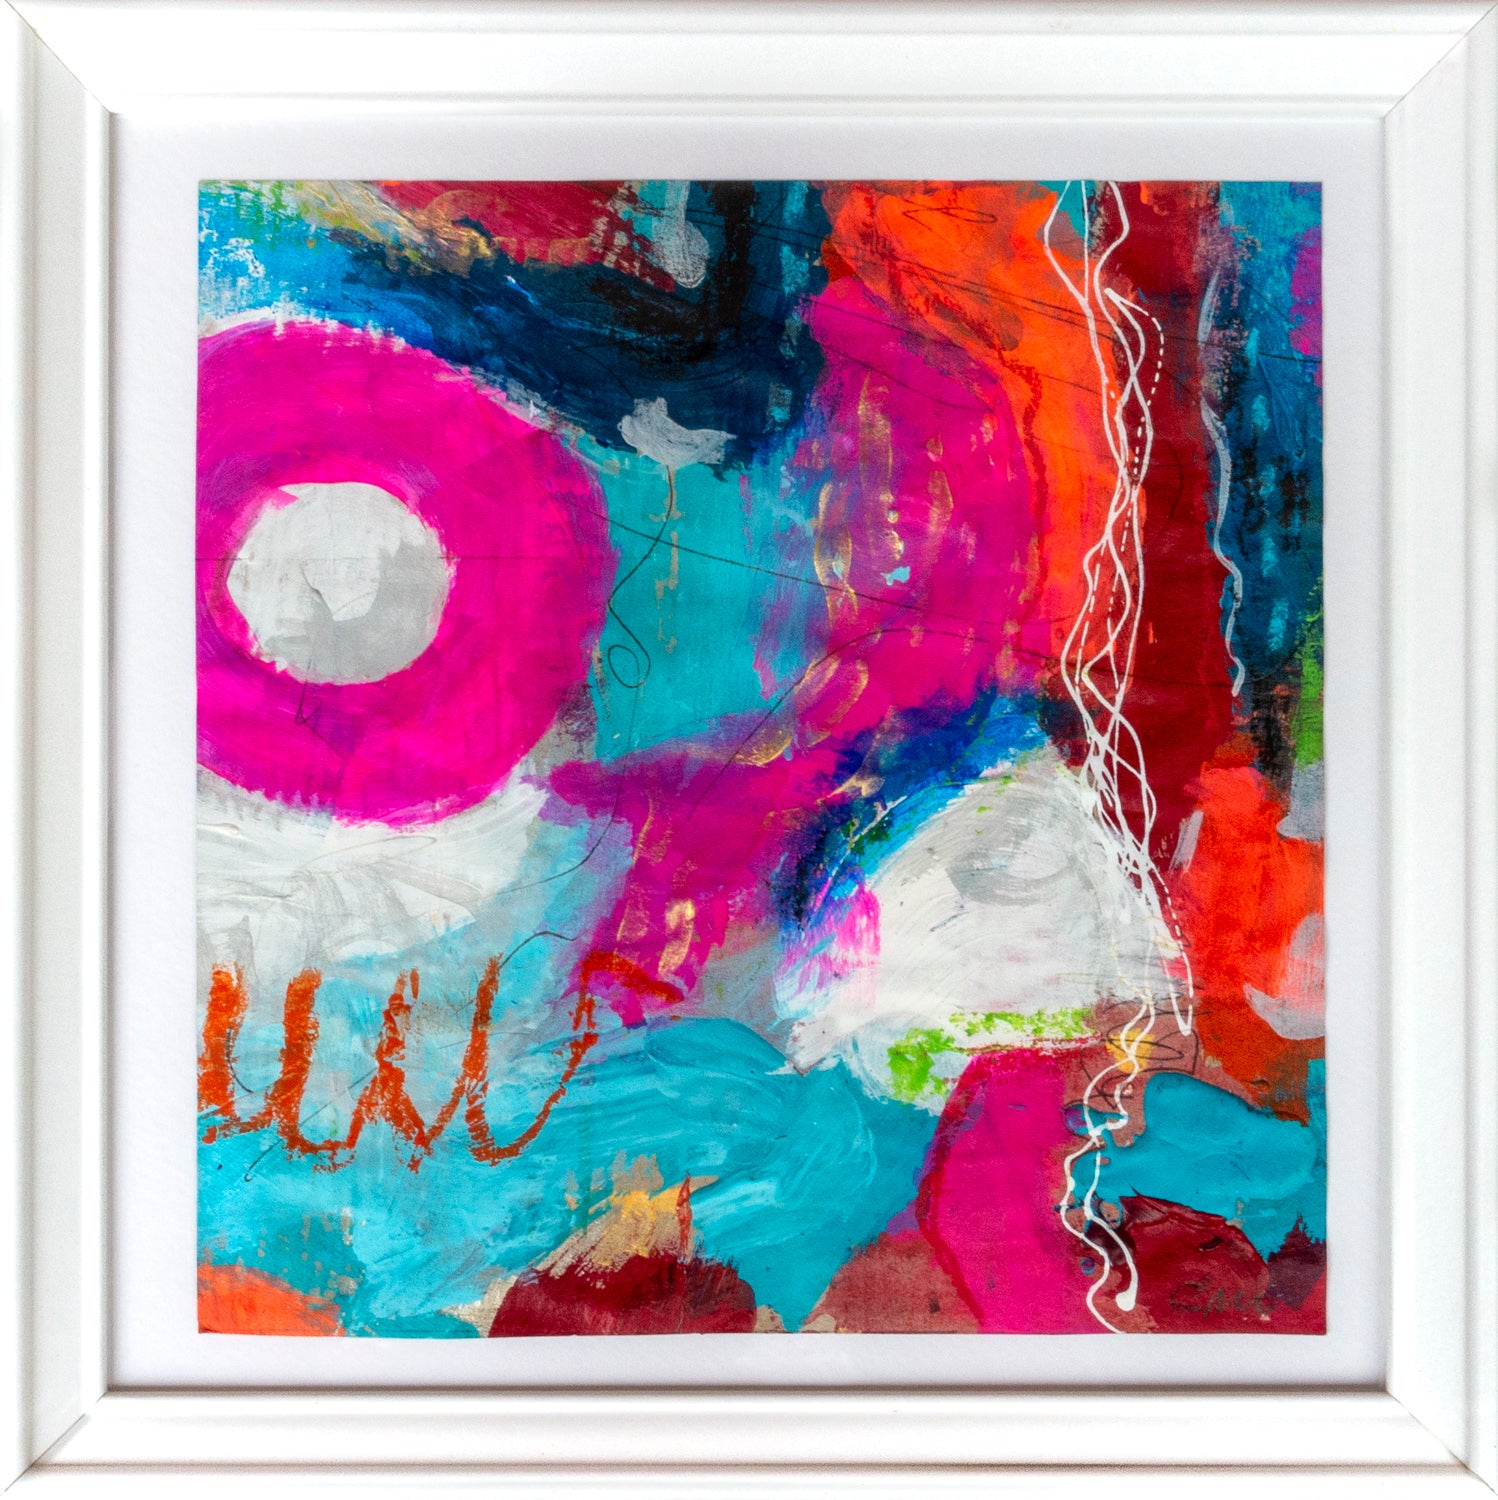 Colorful acrylic abstract painting on paper titled 'Workshop 10' by artist Steffi Möllers; measures app 7.5"x7.5", w/frame 10"x10"